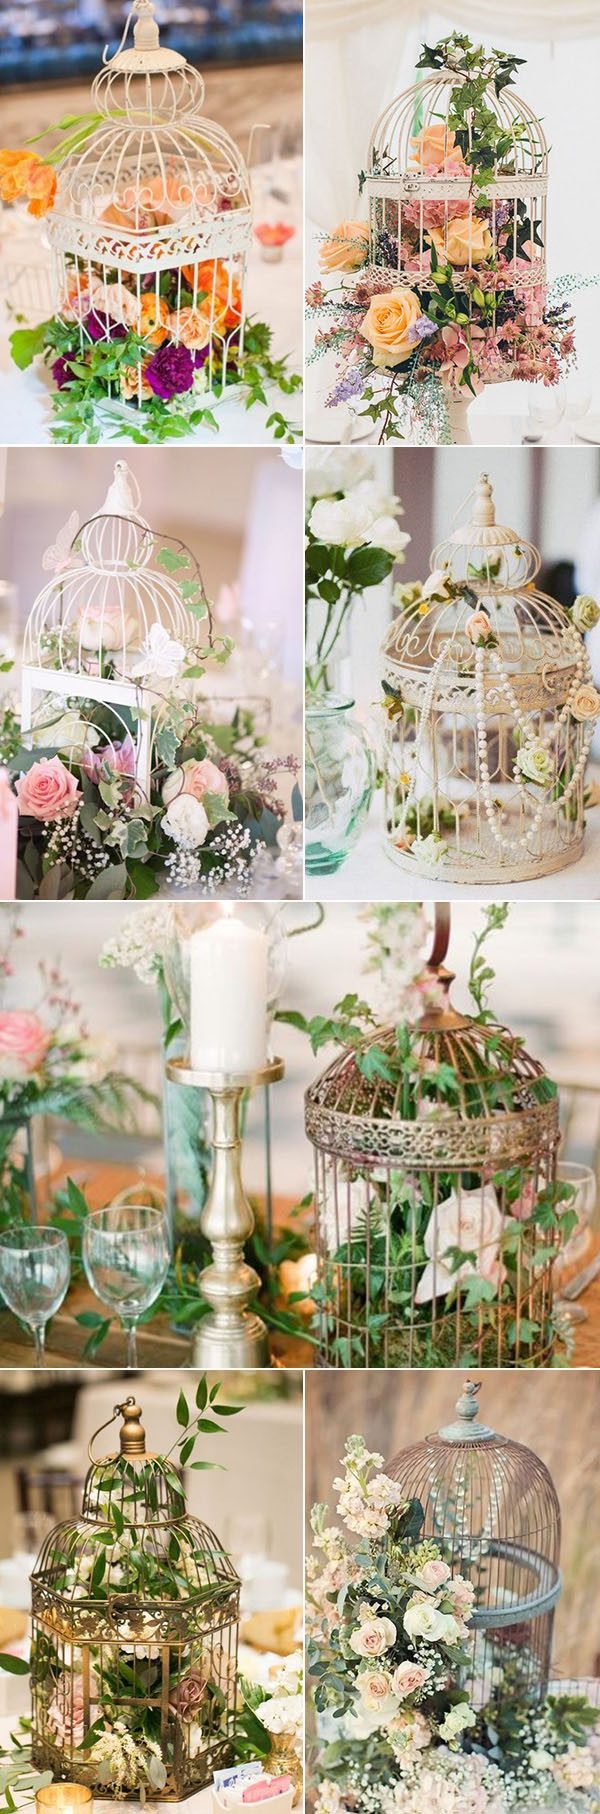 Floral wedding centerpieces unique metal cage the best choose in your special wedding